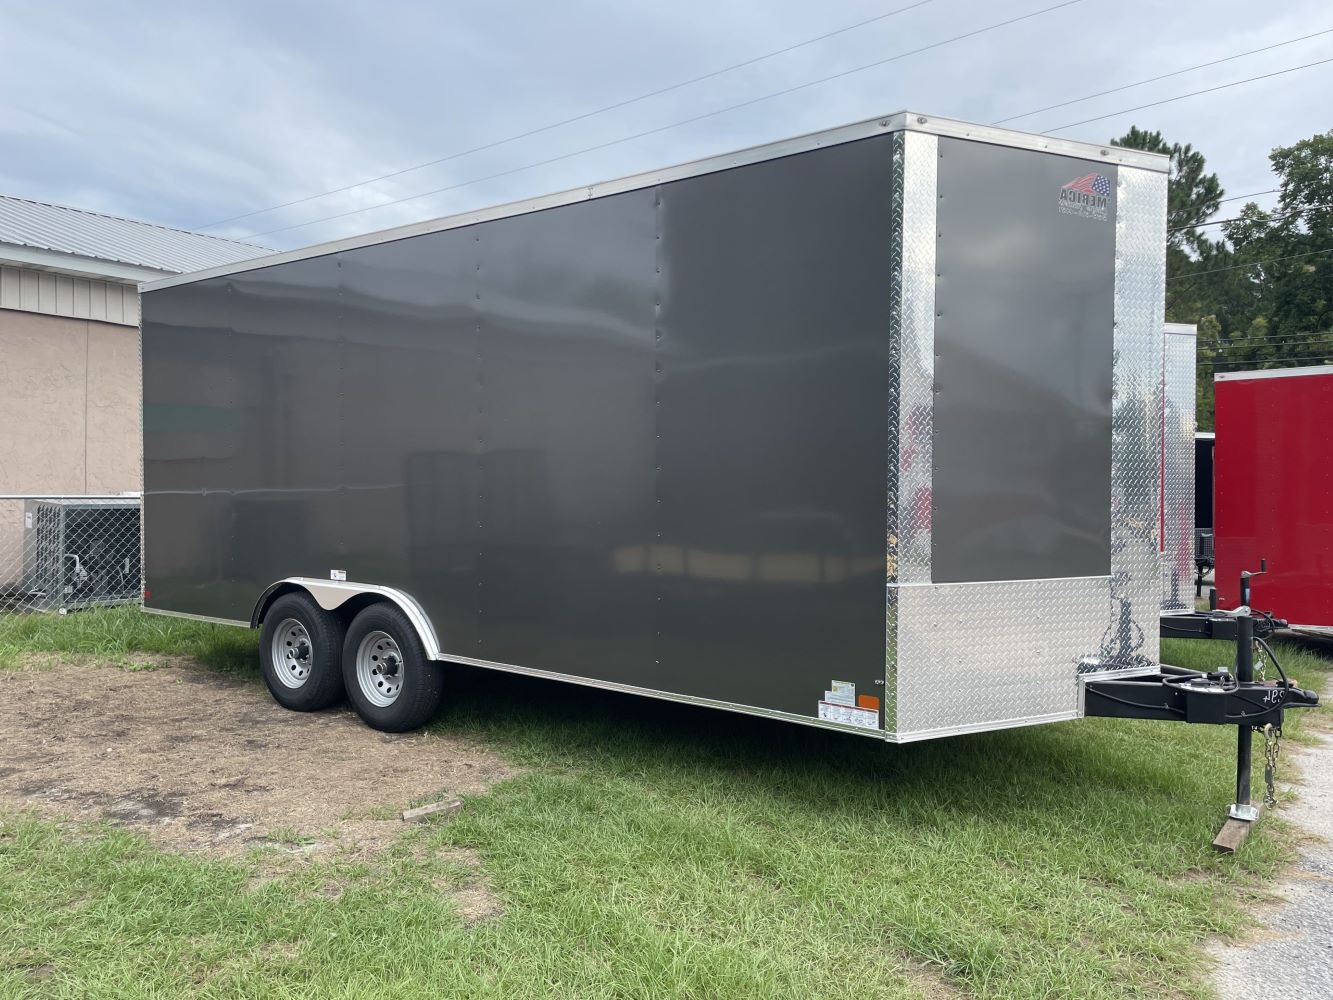 DIY Guide: Building An Enclosed Trailer From Scratch